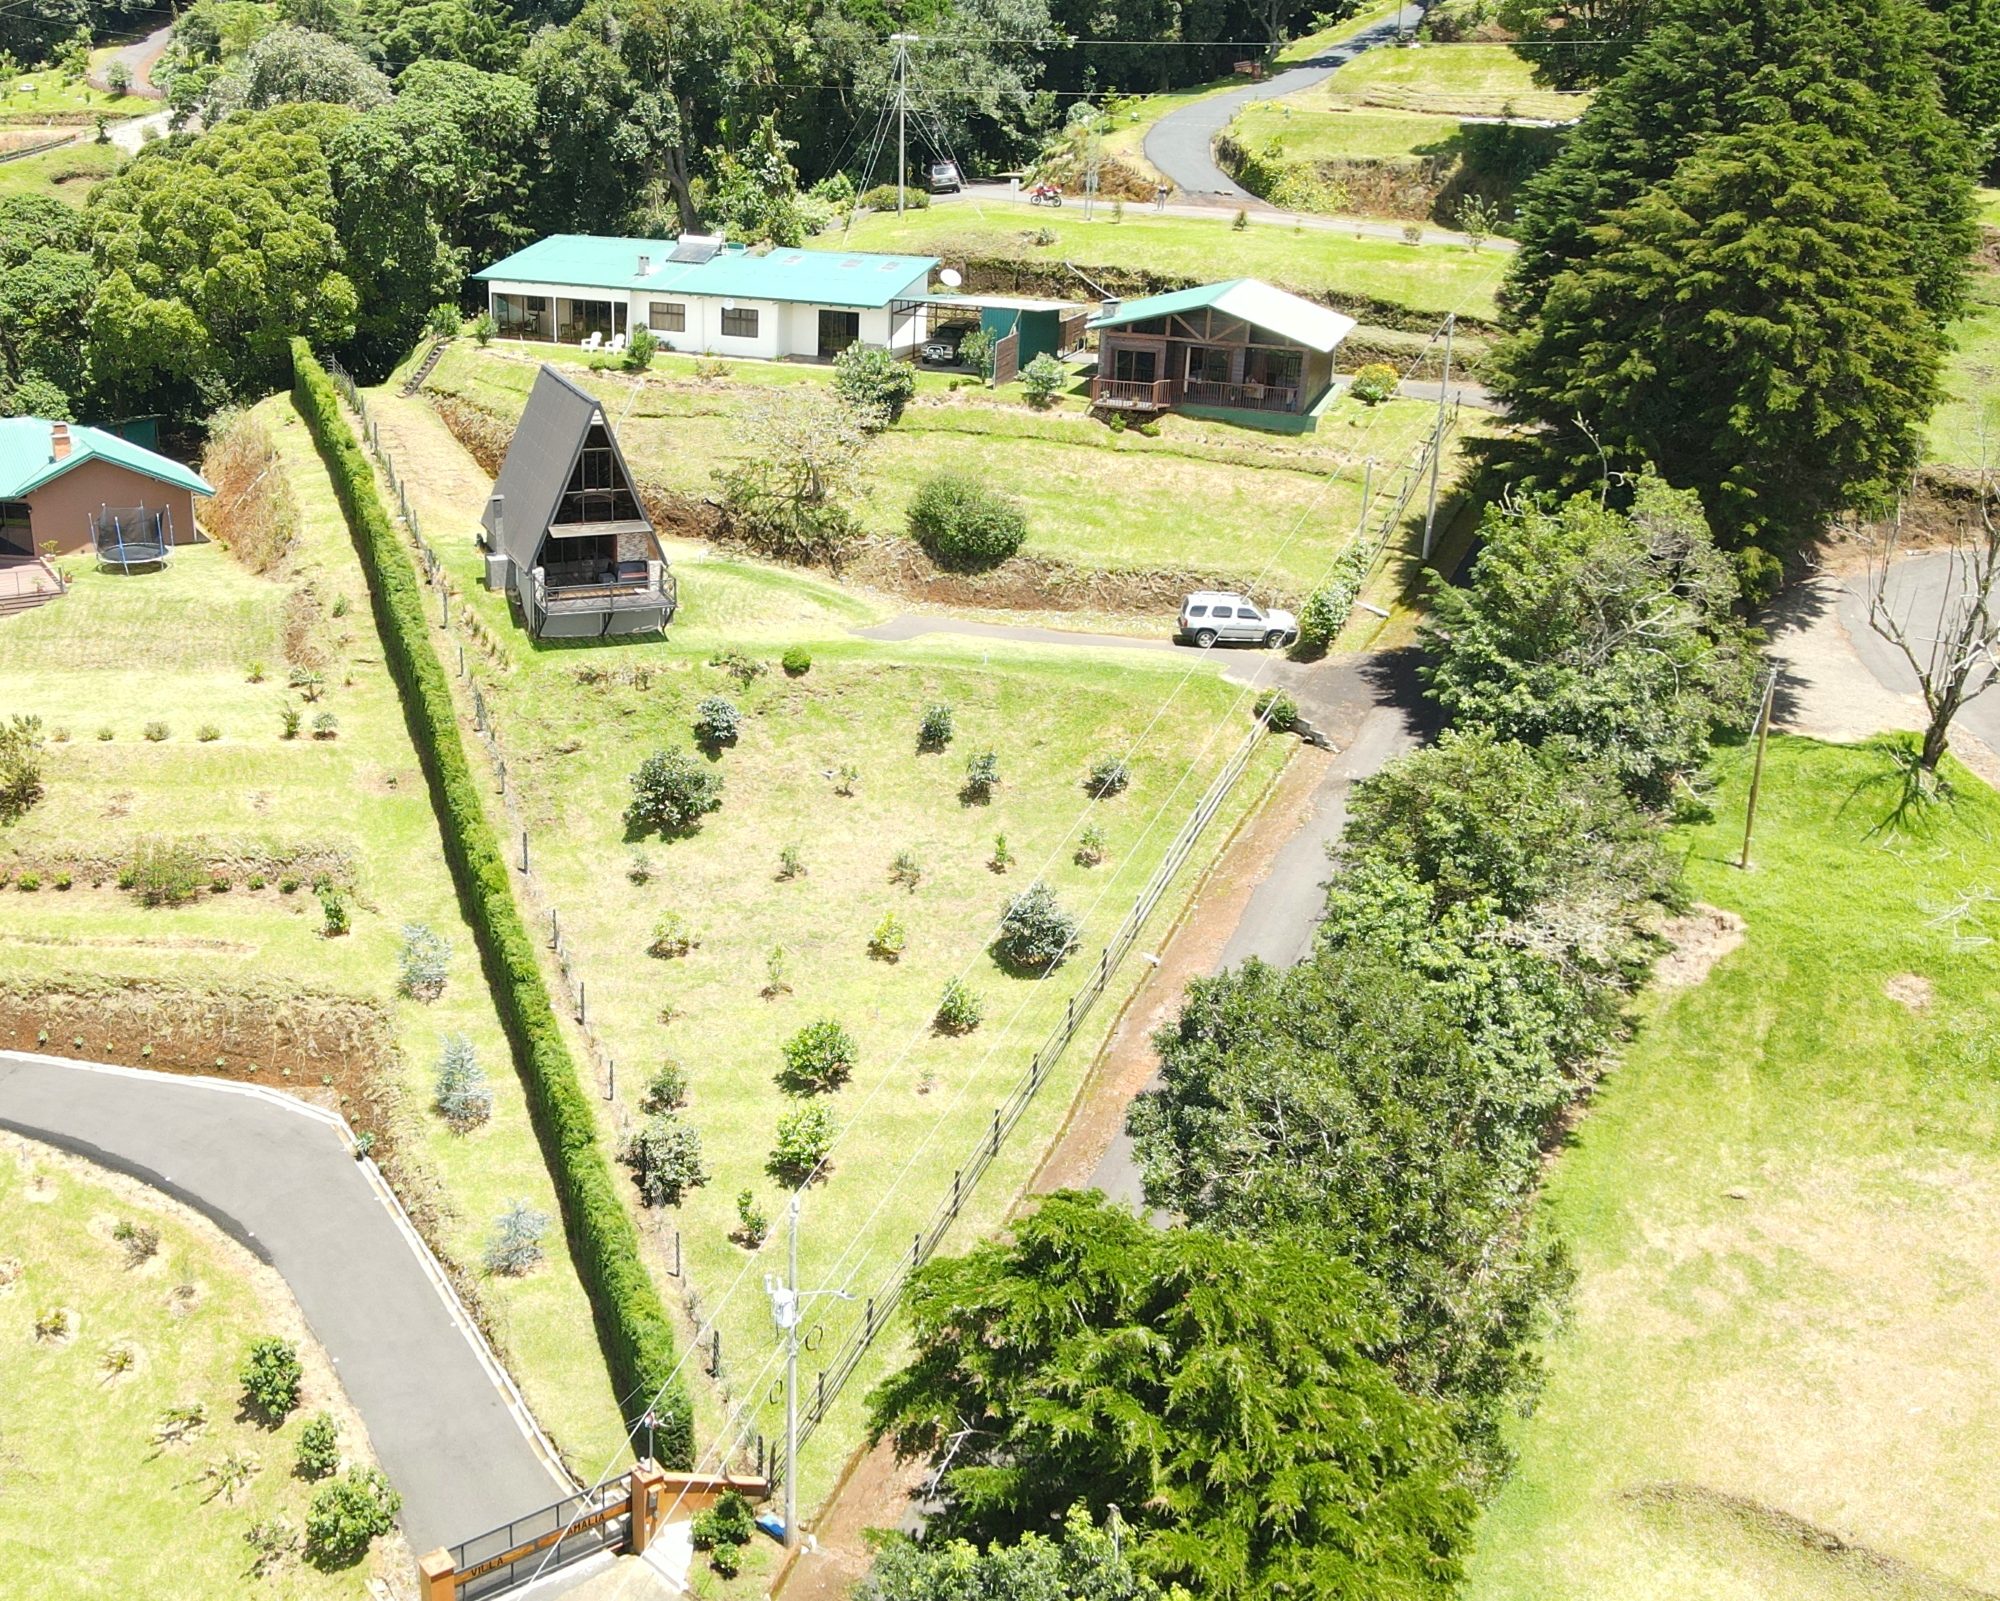 Breathtaking Views Property with 3 houses in the Foothills of Poas Volcano